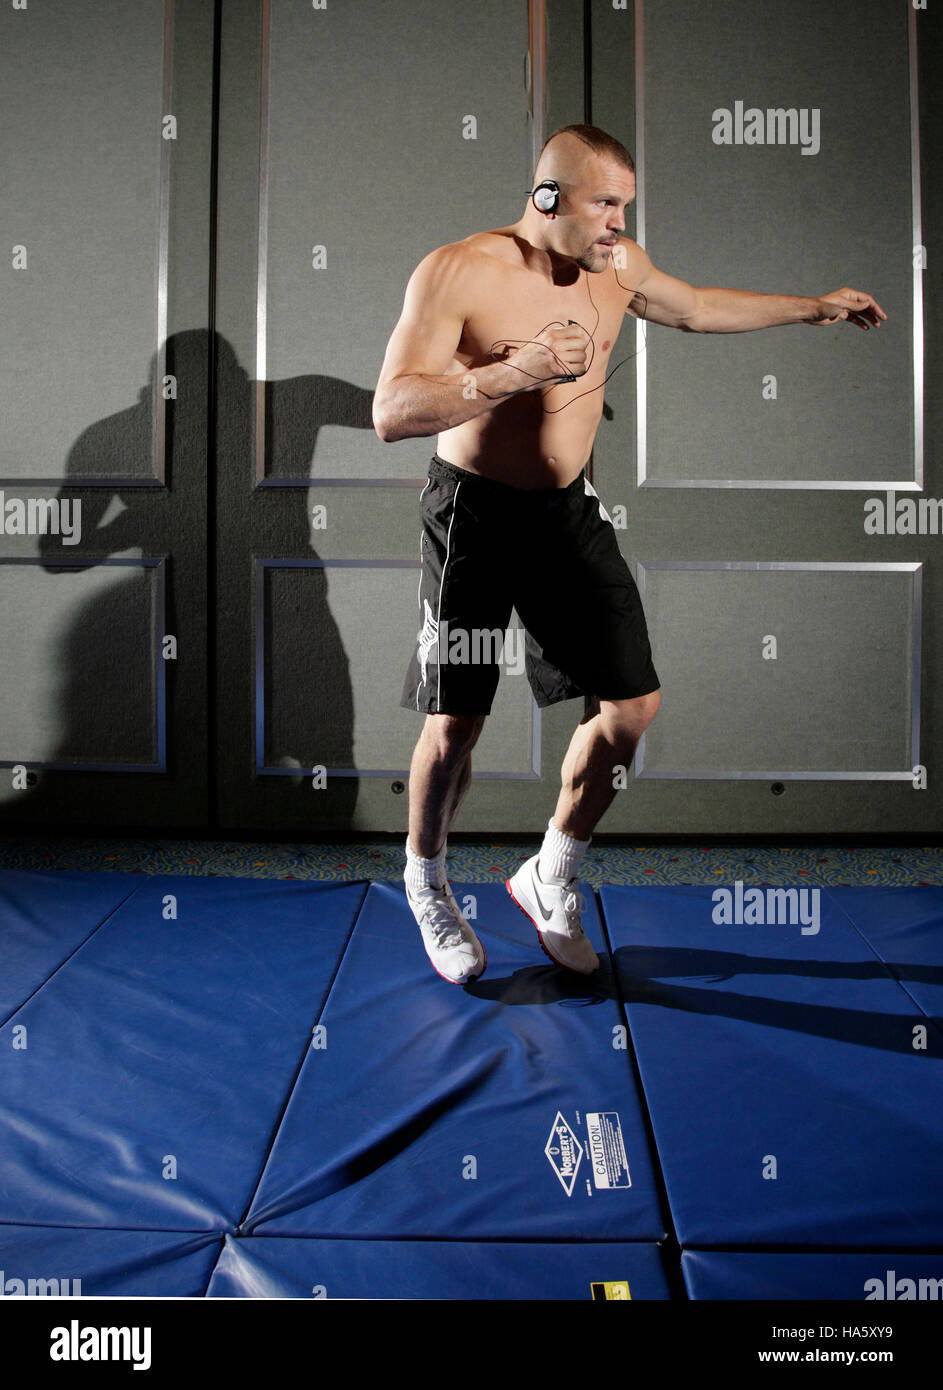 UFC fighter Chuck Liddell at a training session in Anaheim, California,  Wednesday, Sept. 19, 2007. Photo credit: Francis Specker Stock Photo - Alamy